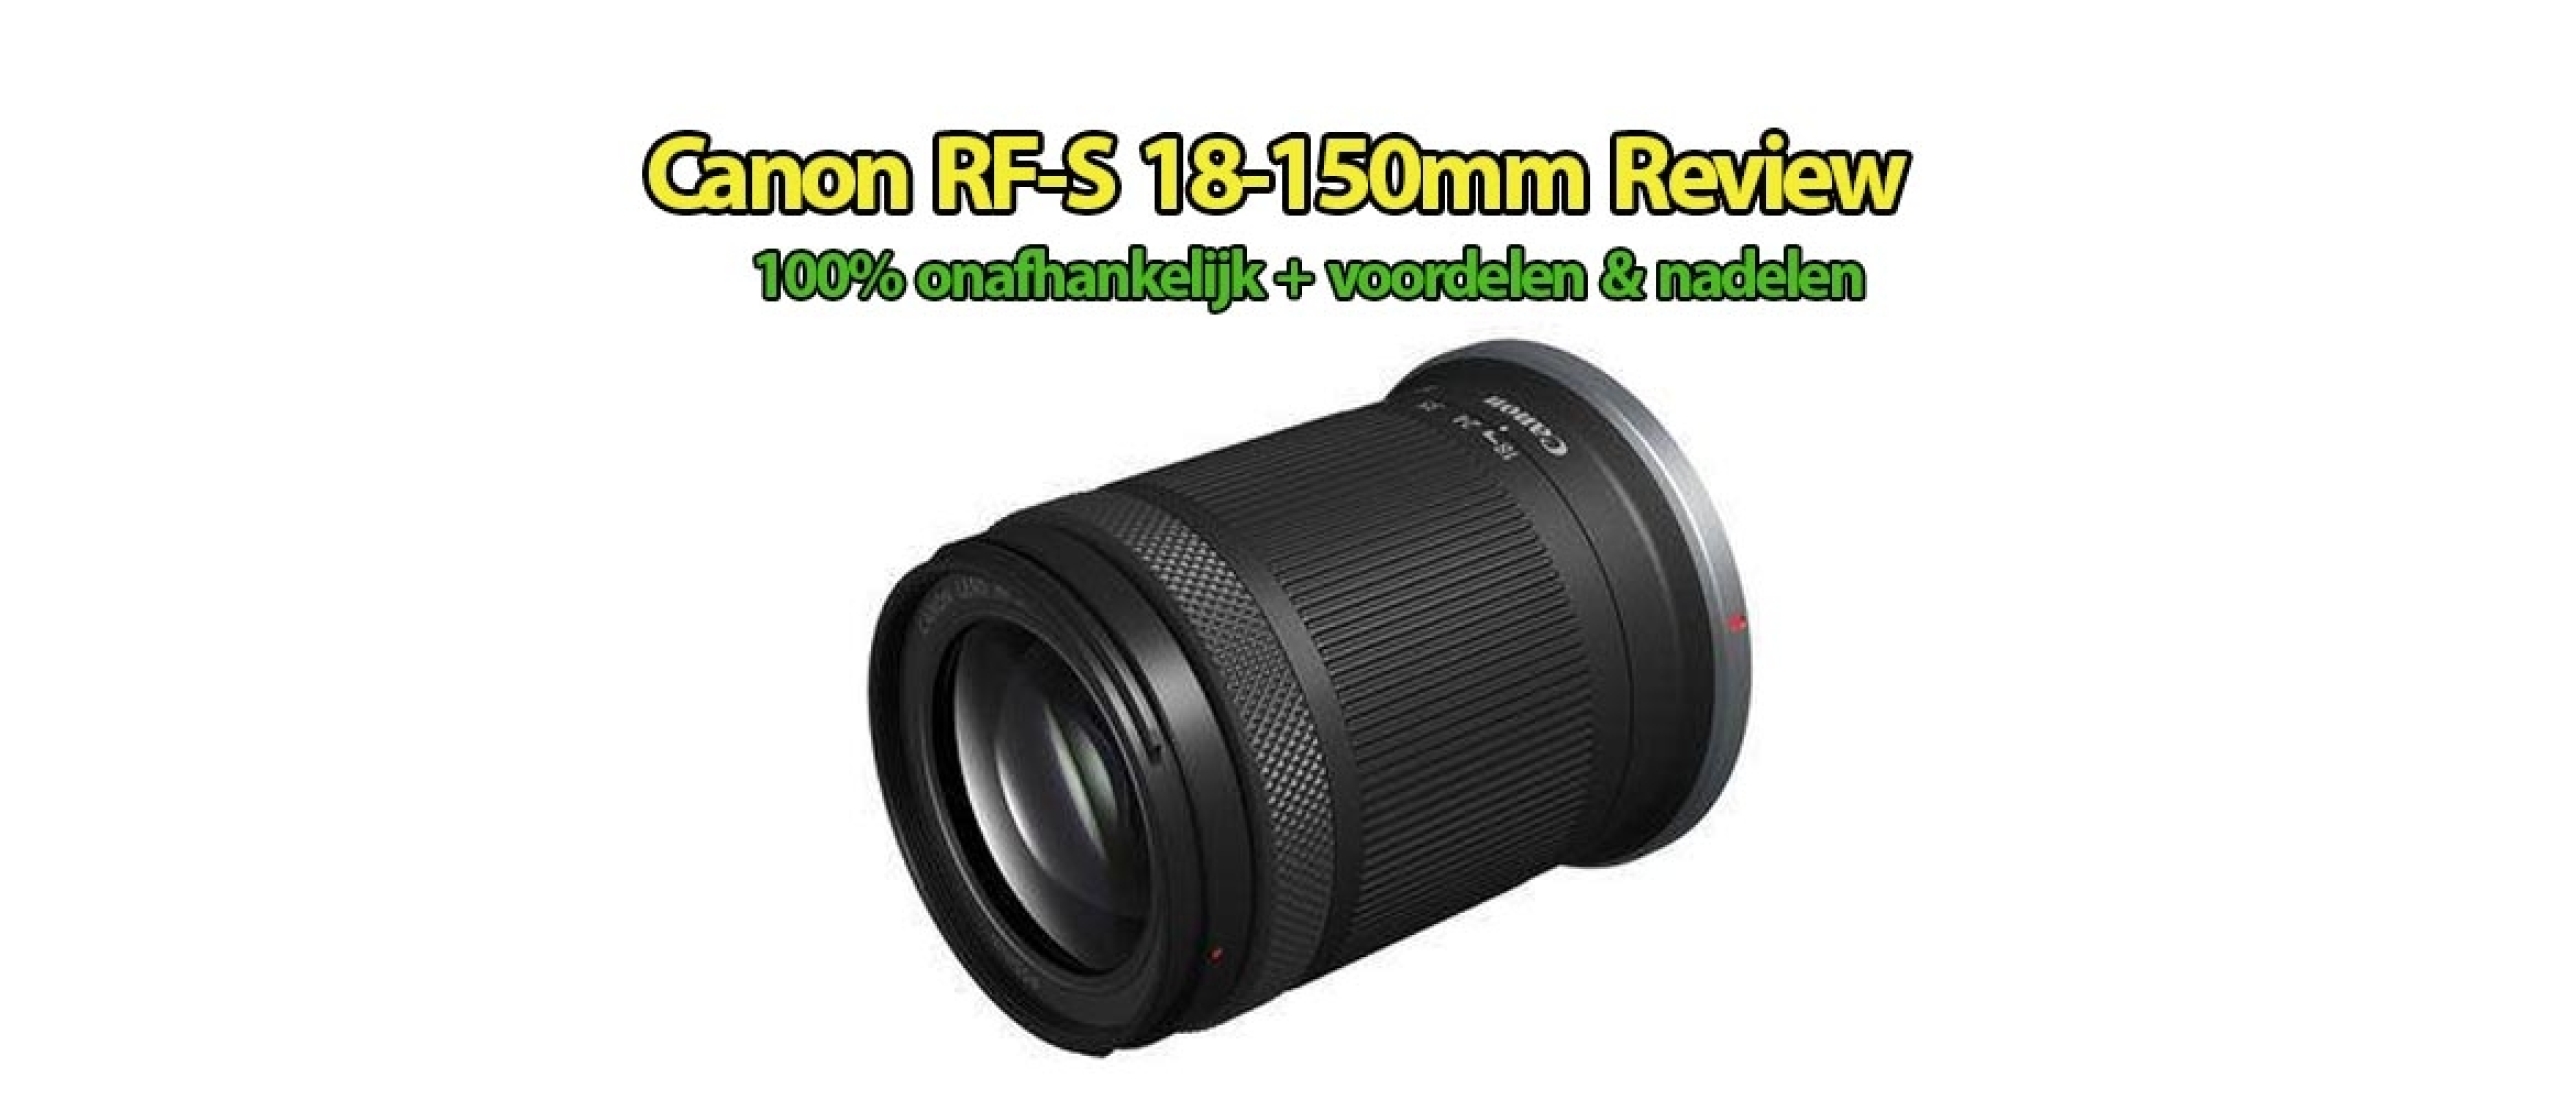 Canon RF-S 18-150mm F/3.5-6.3 IS STM Review